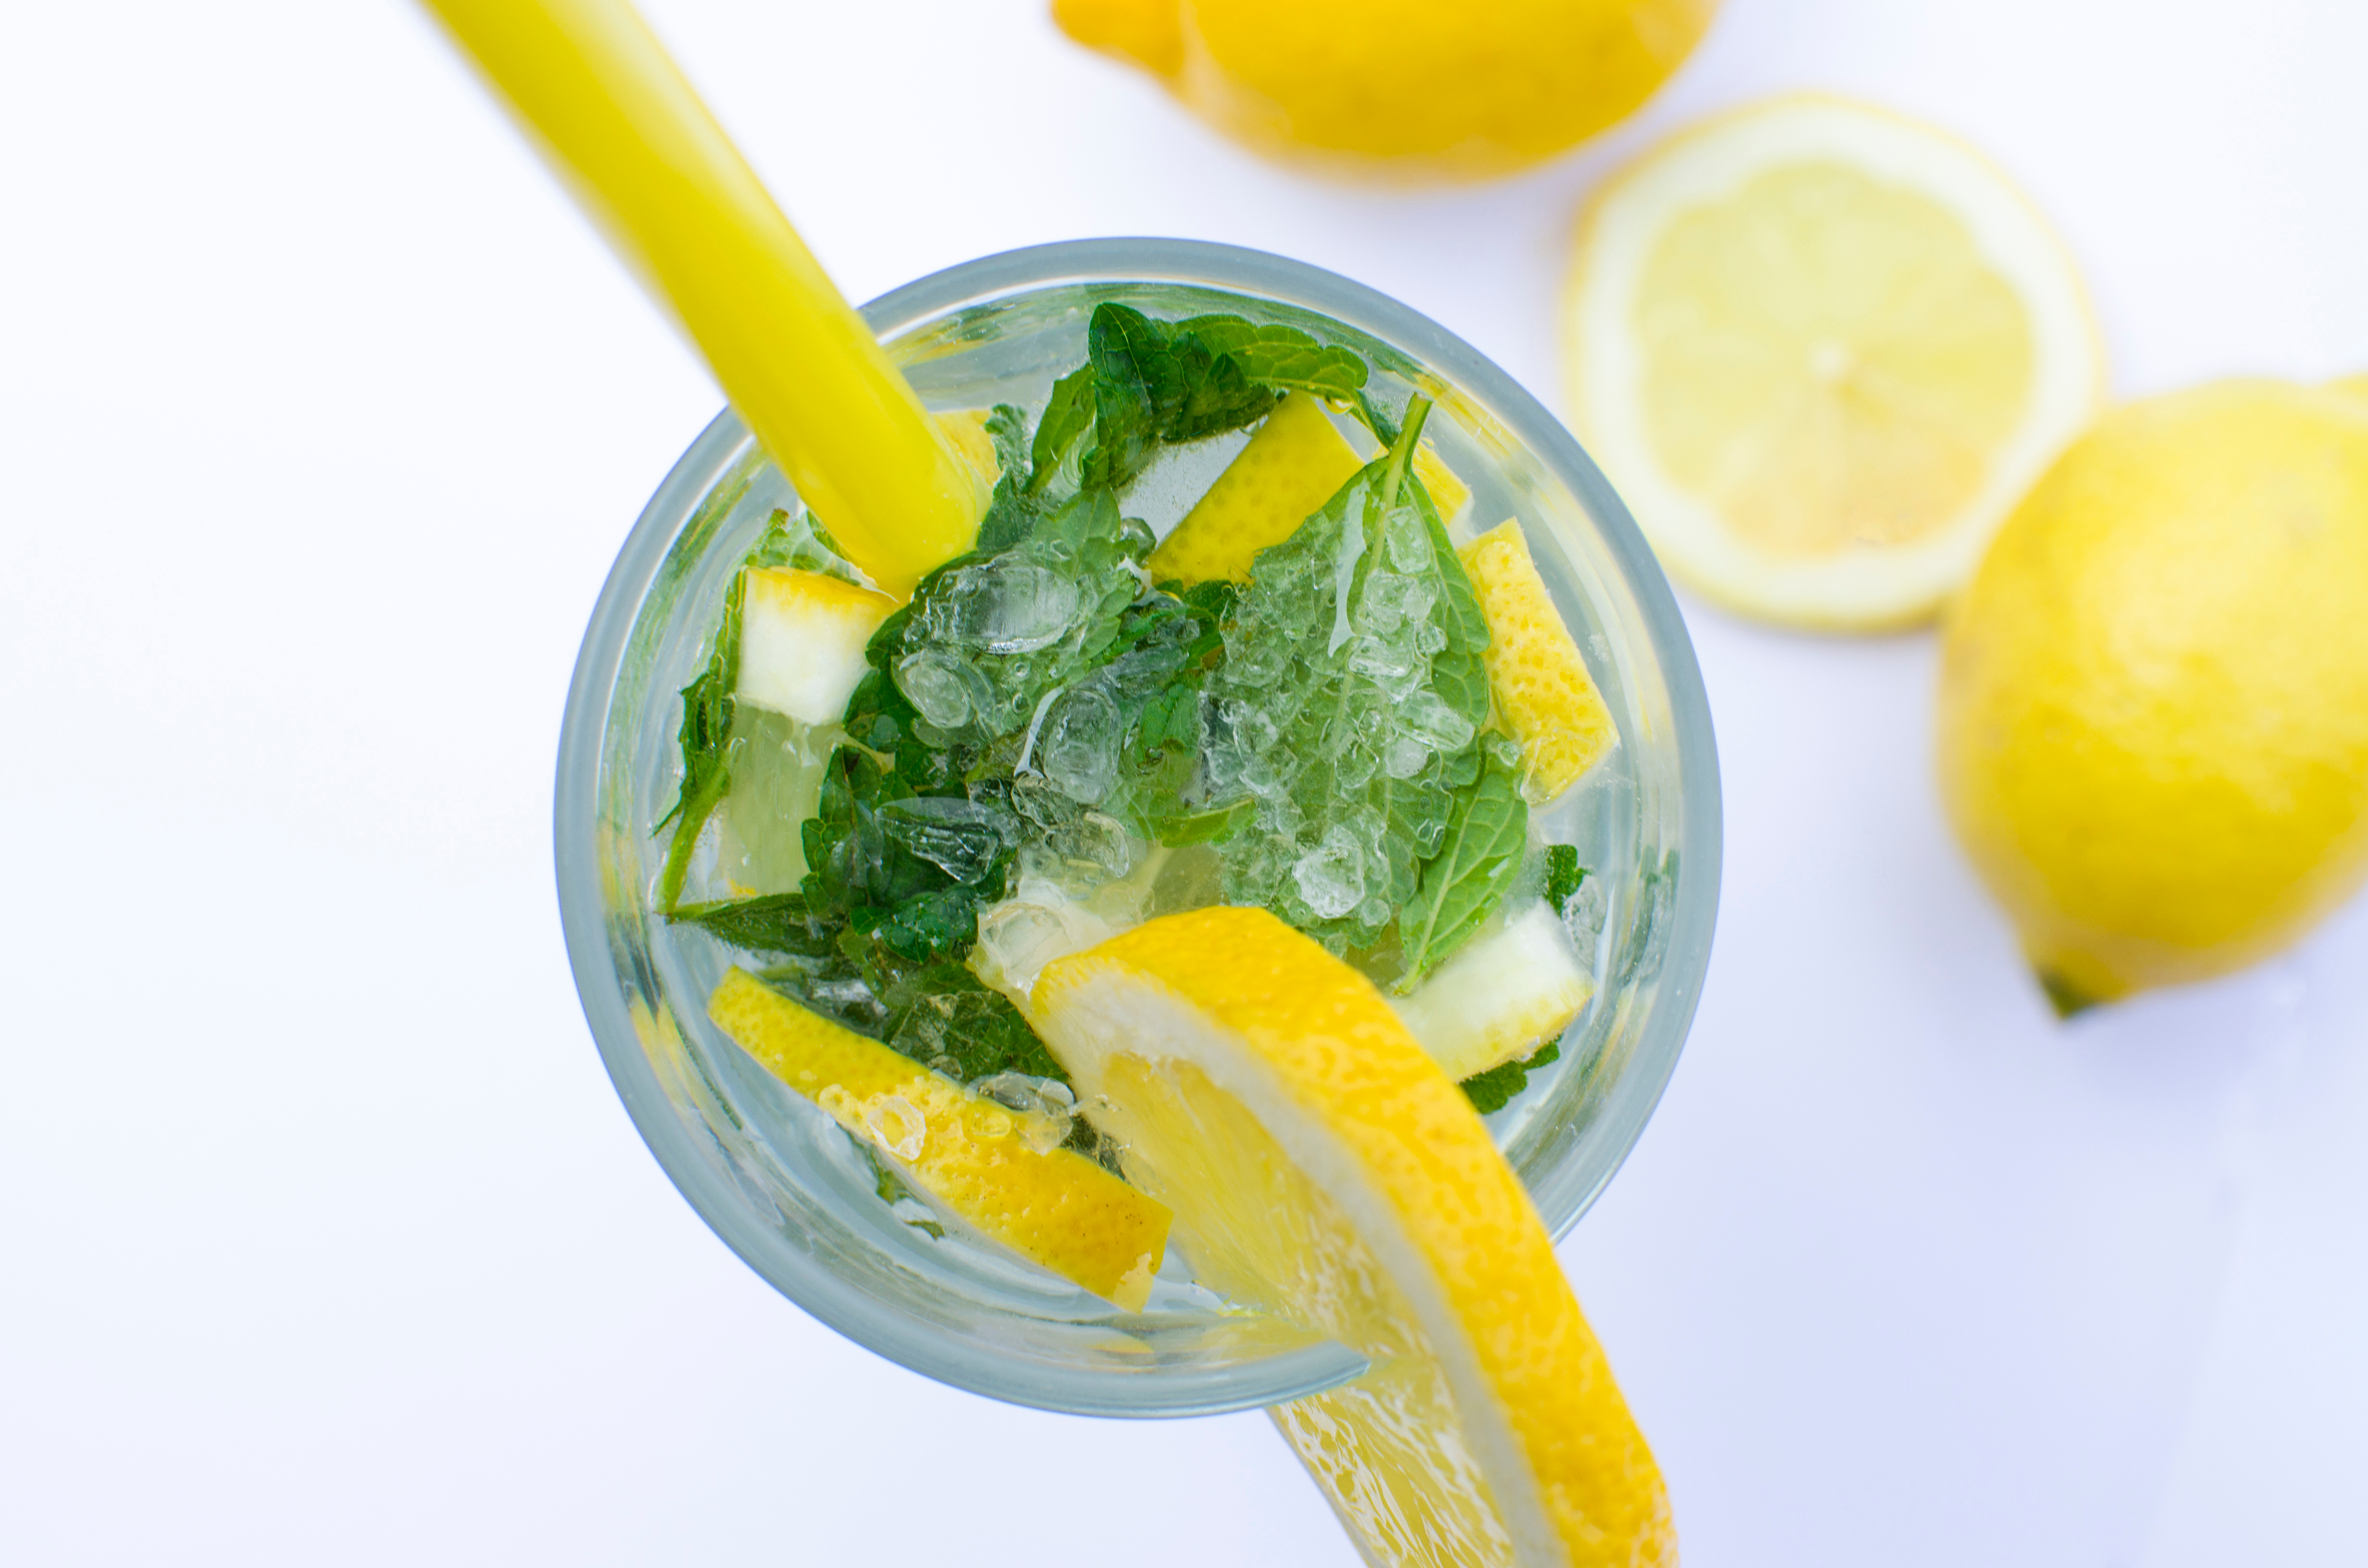 Canva_-_Mojito_Alcohol_Drink_with_Mint_and_Lemon